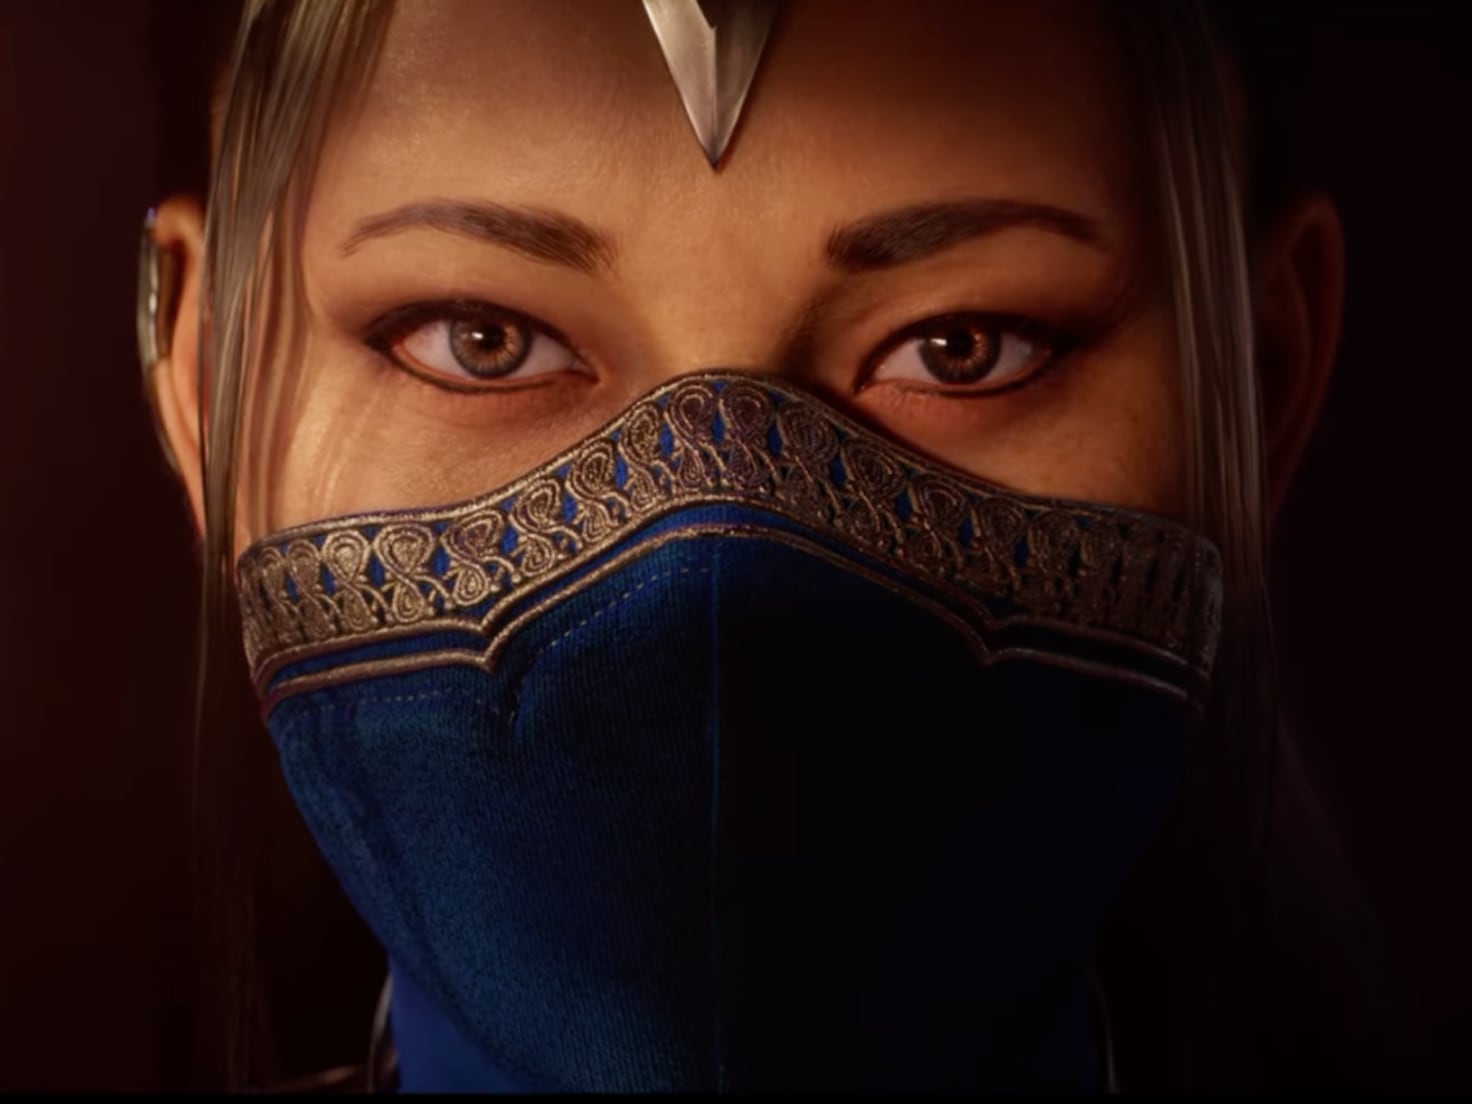 Mortal Kombat 1 pre-order beta start date and how to get access - Polygon